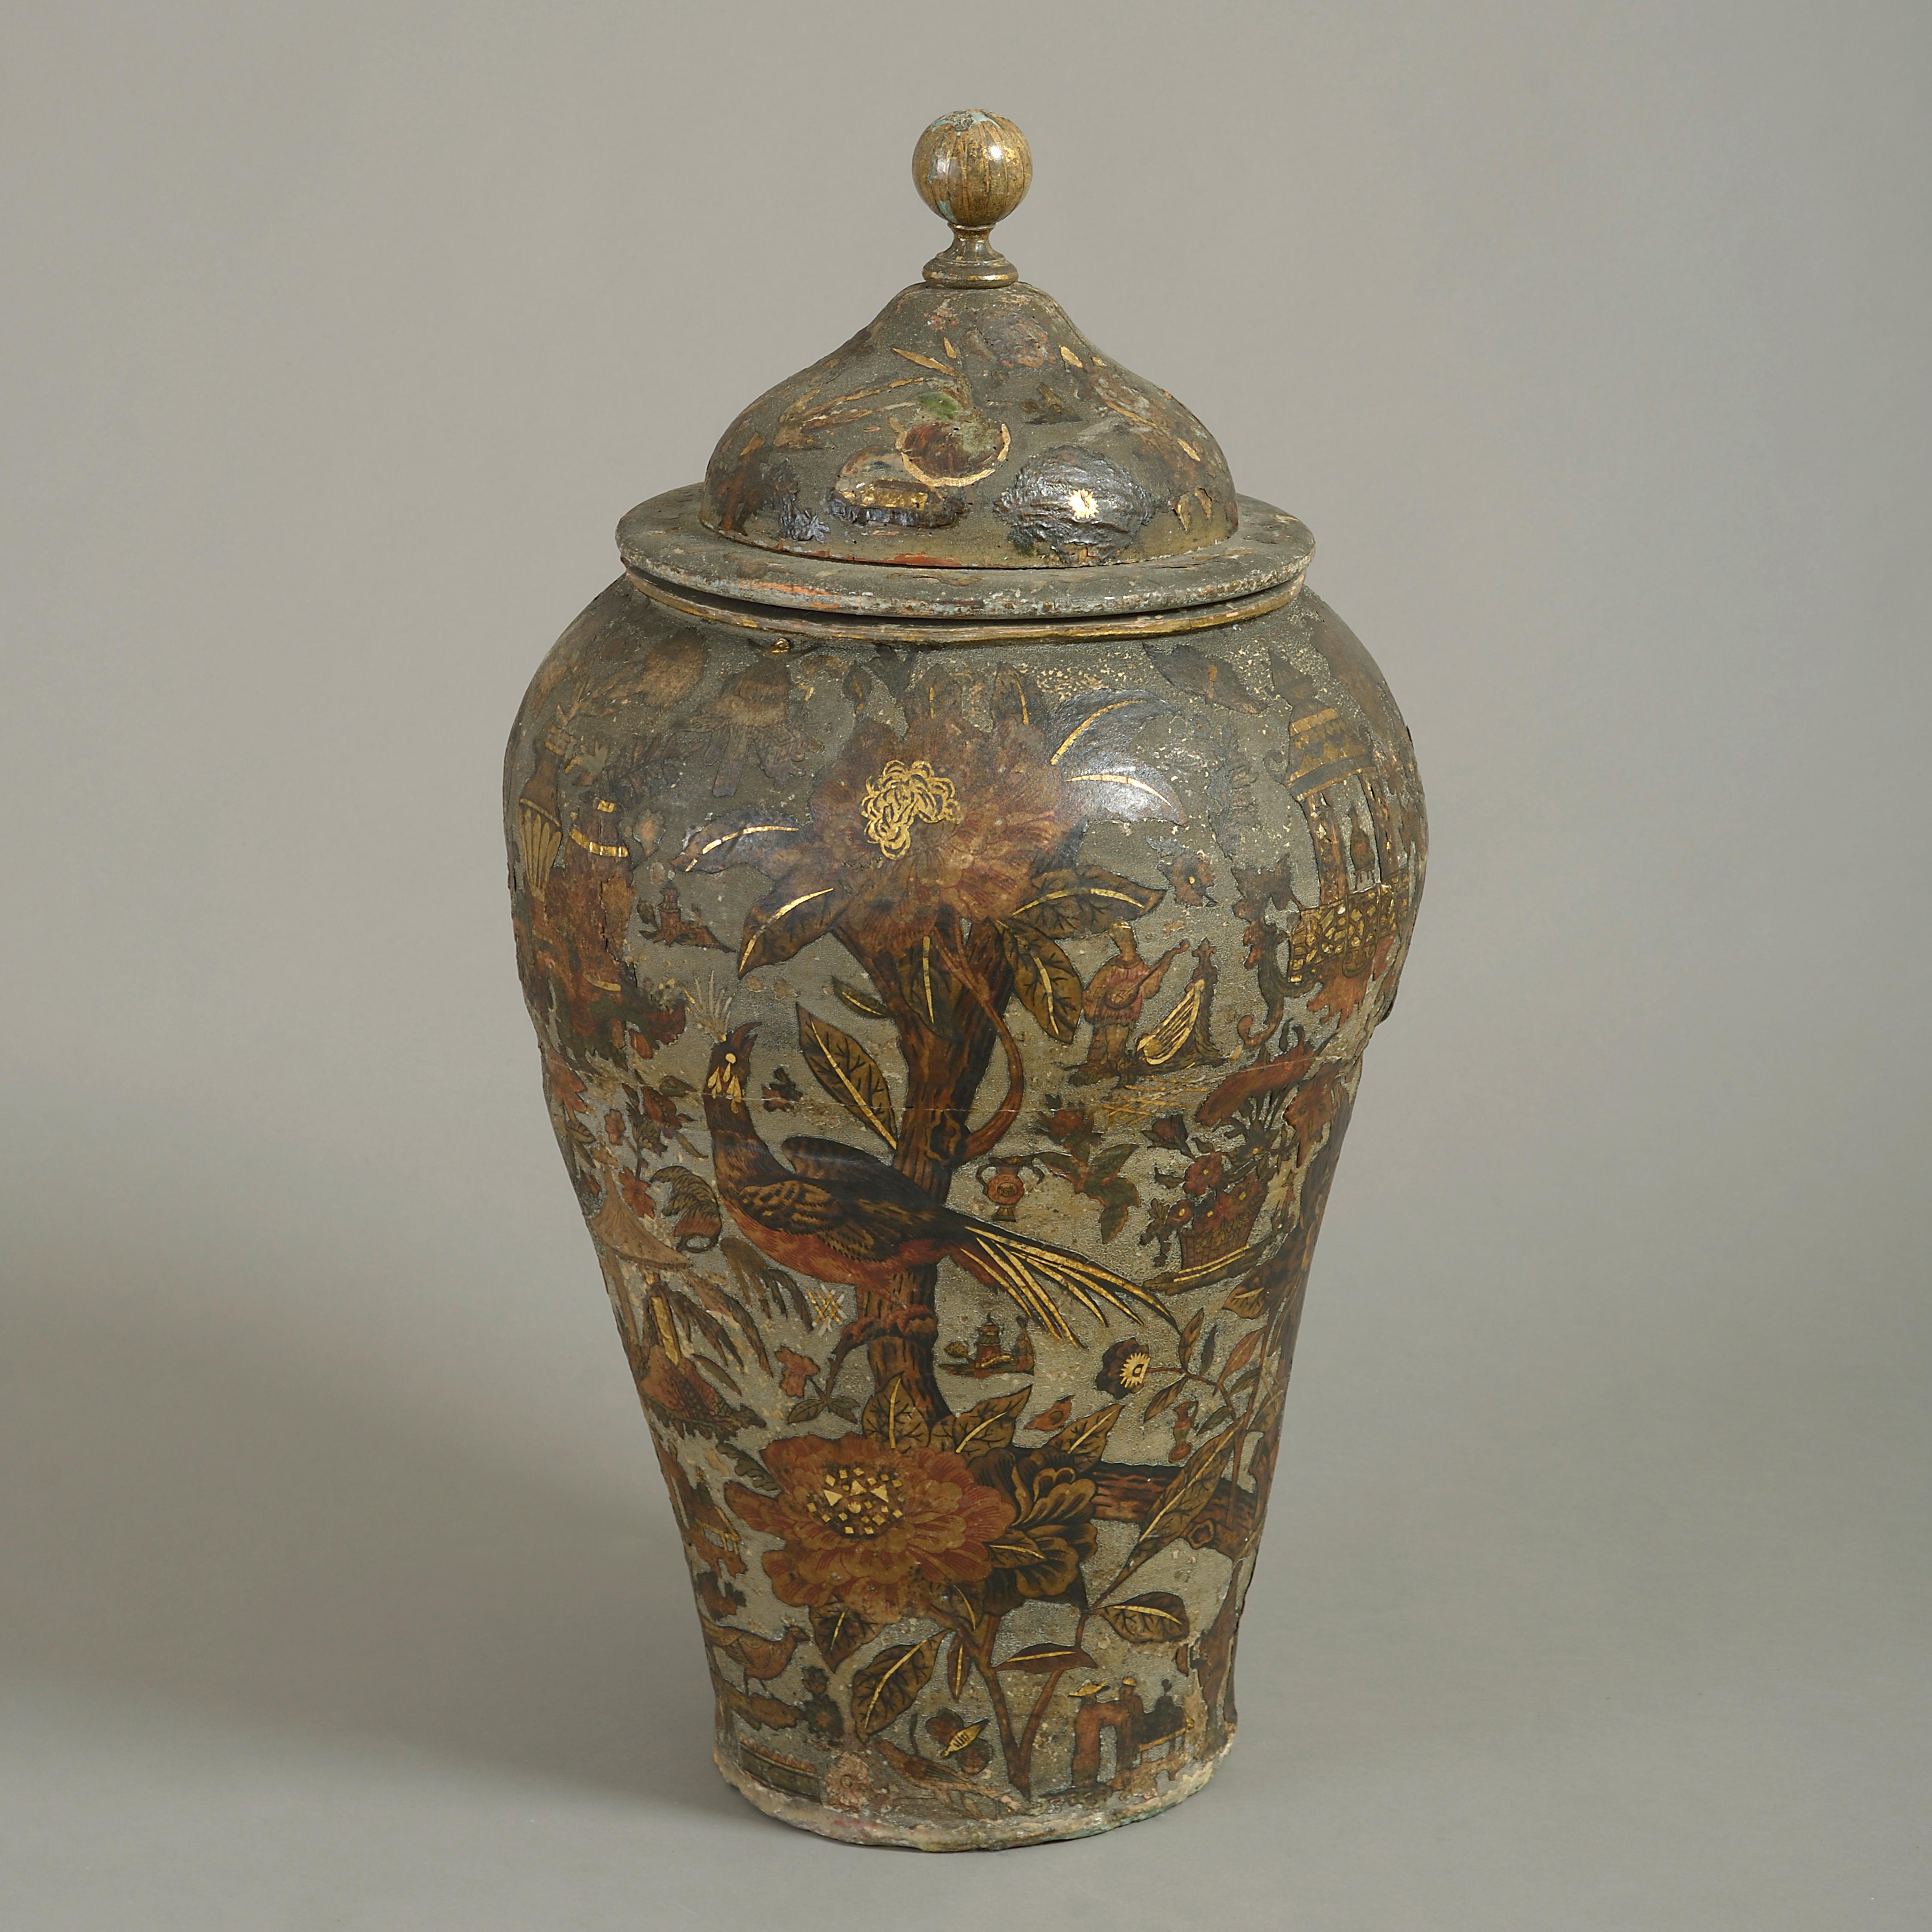 A rare ant tall 18th century arte povera vase, having a lid with finial knop, decorated throughout with applied polychrome flowers, foliage and chinoiserie upon a cold painted grey green ground.

Most probably piedmont.